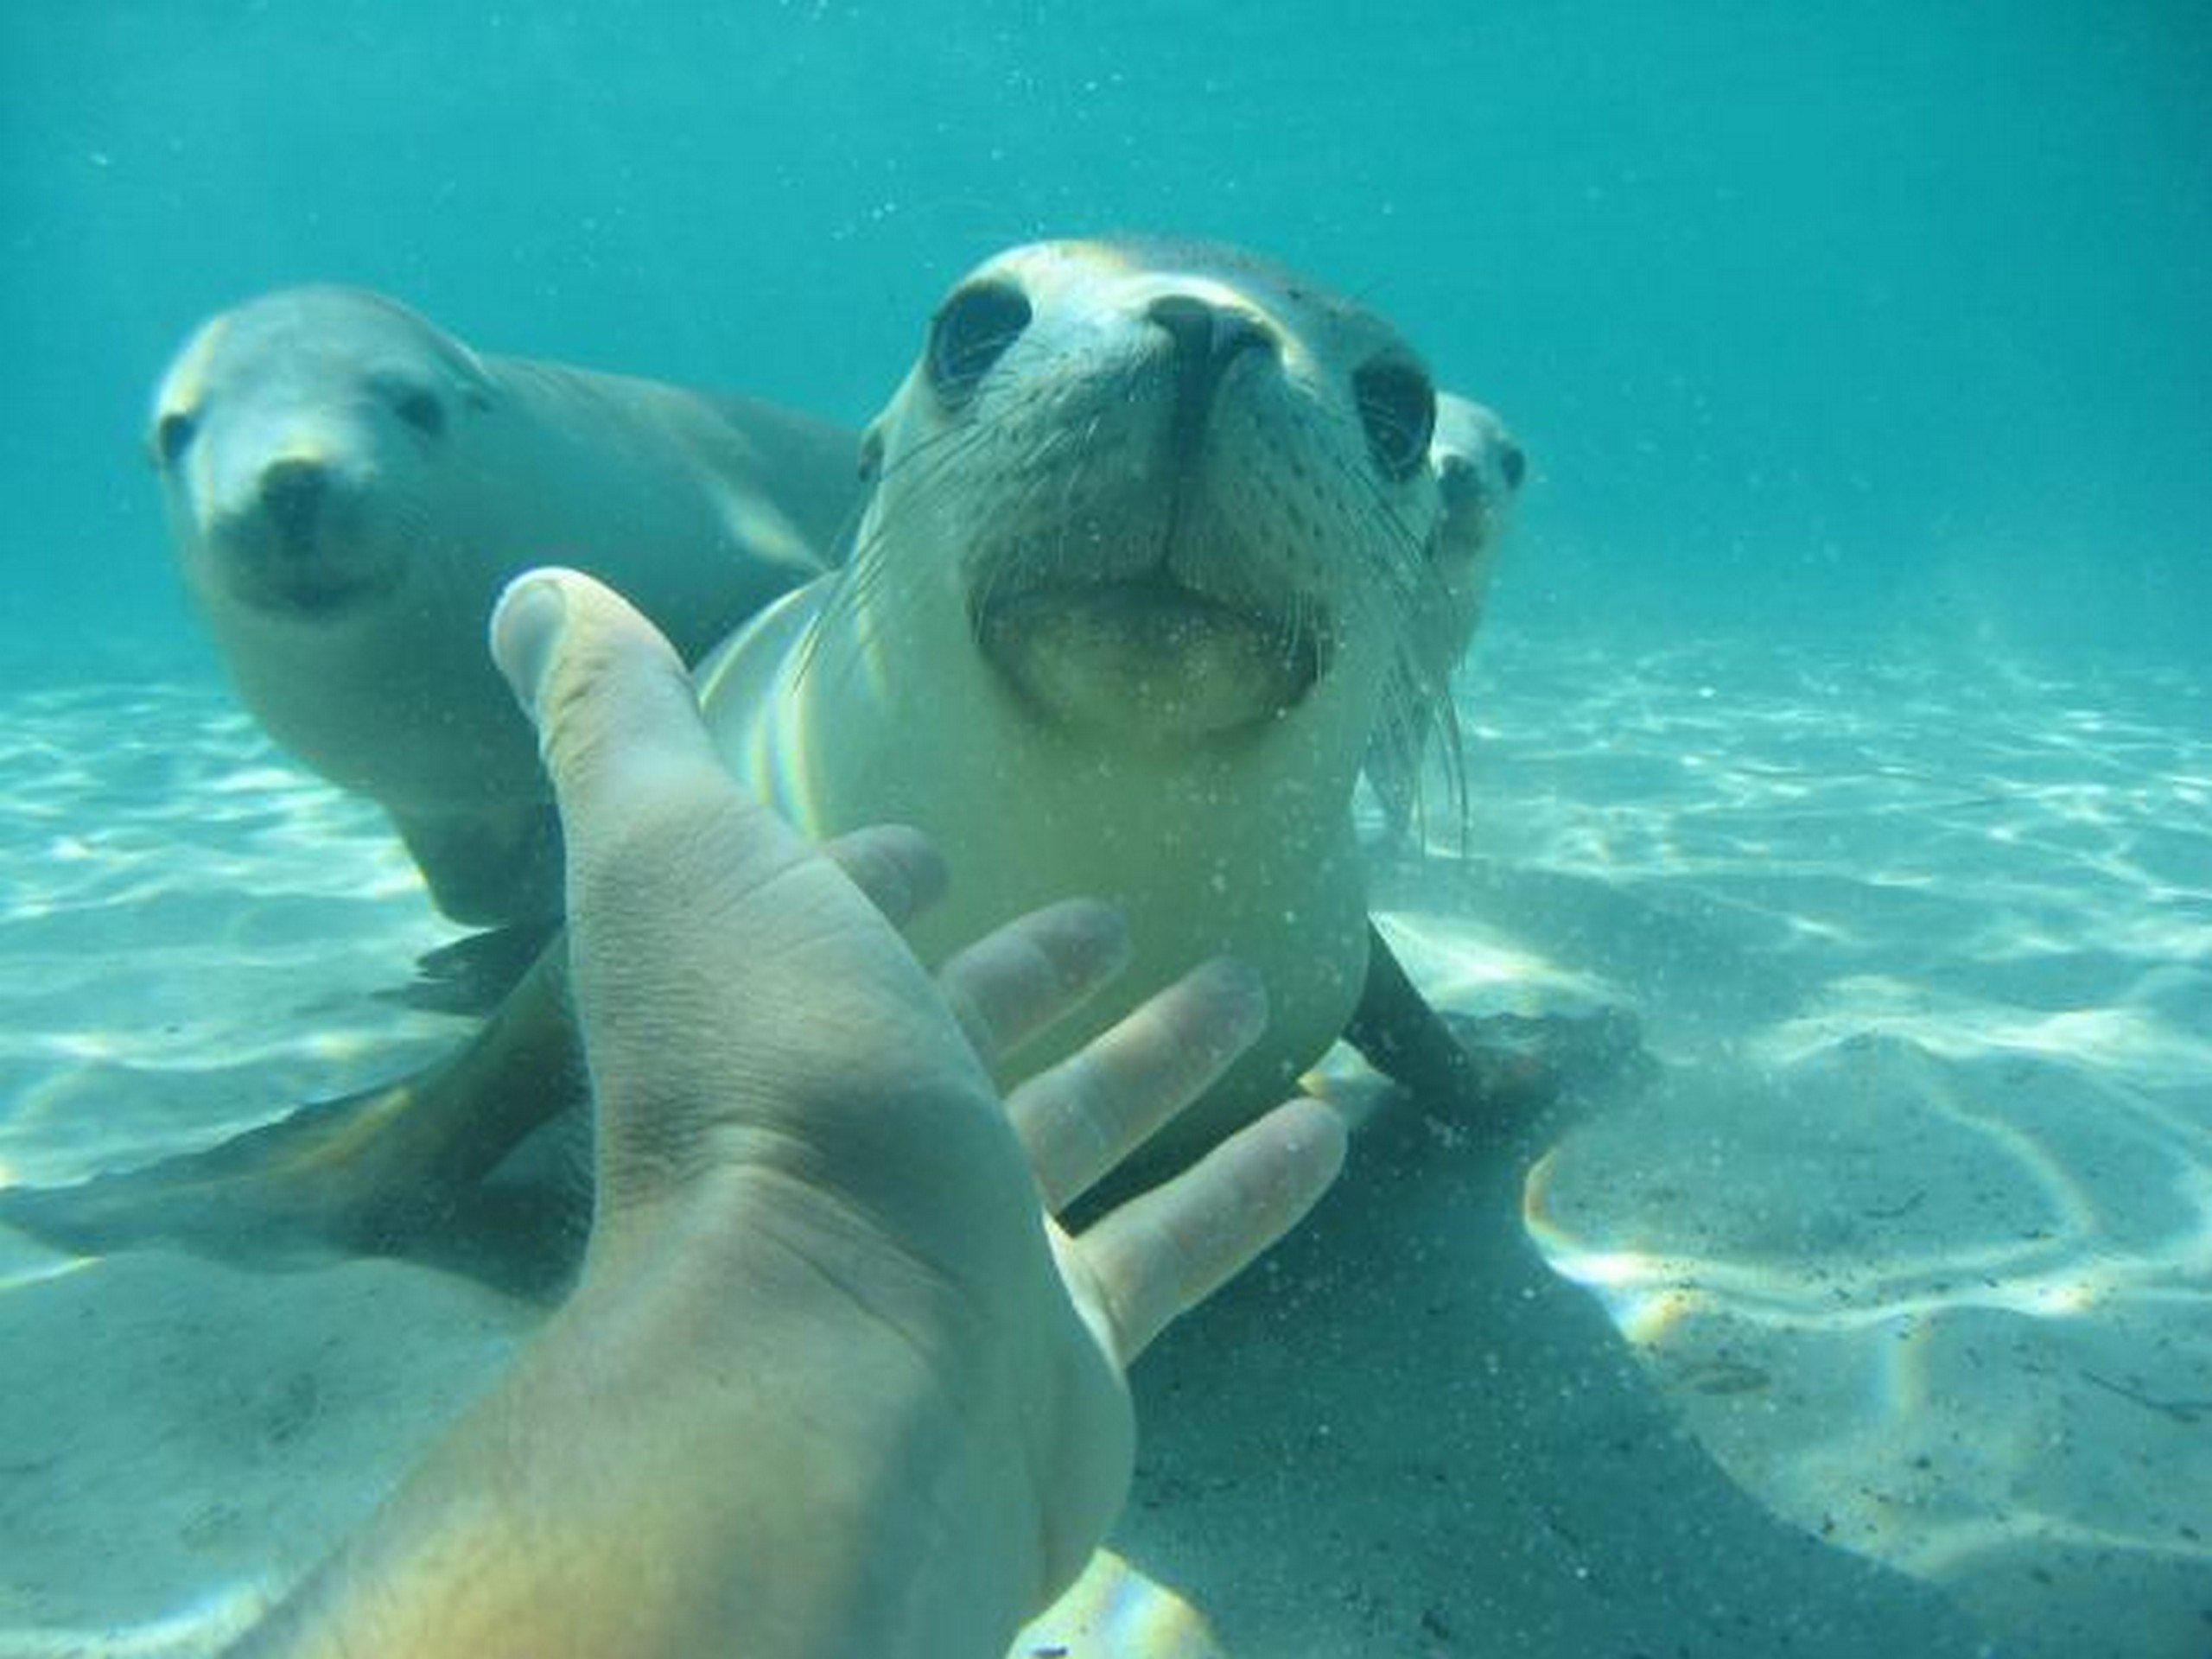 Sea lions met while on a guided tour in Australia